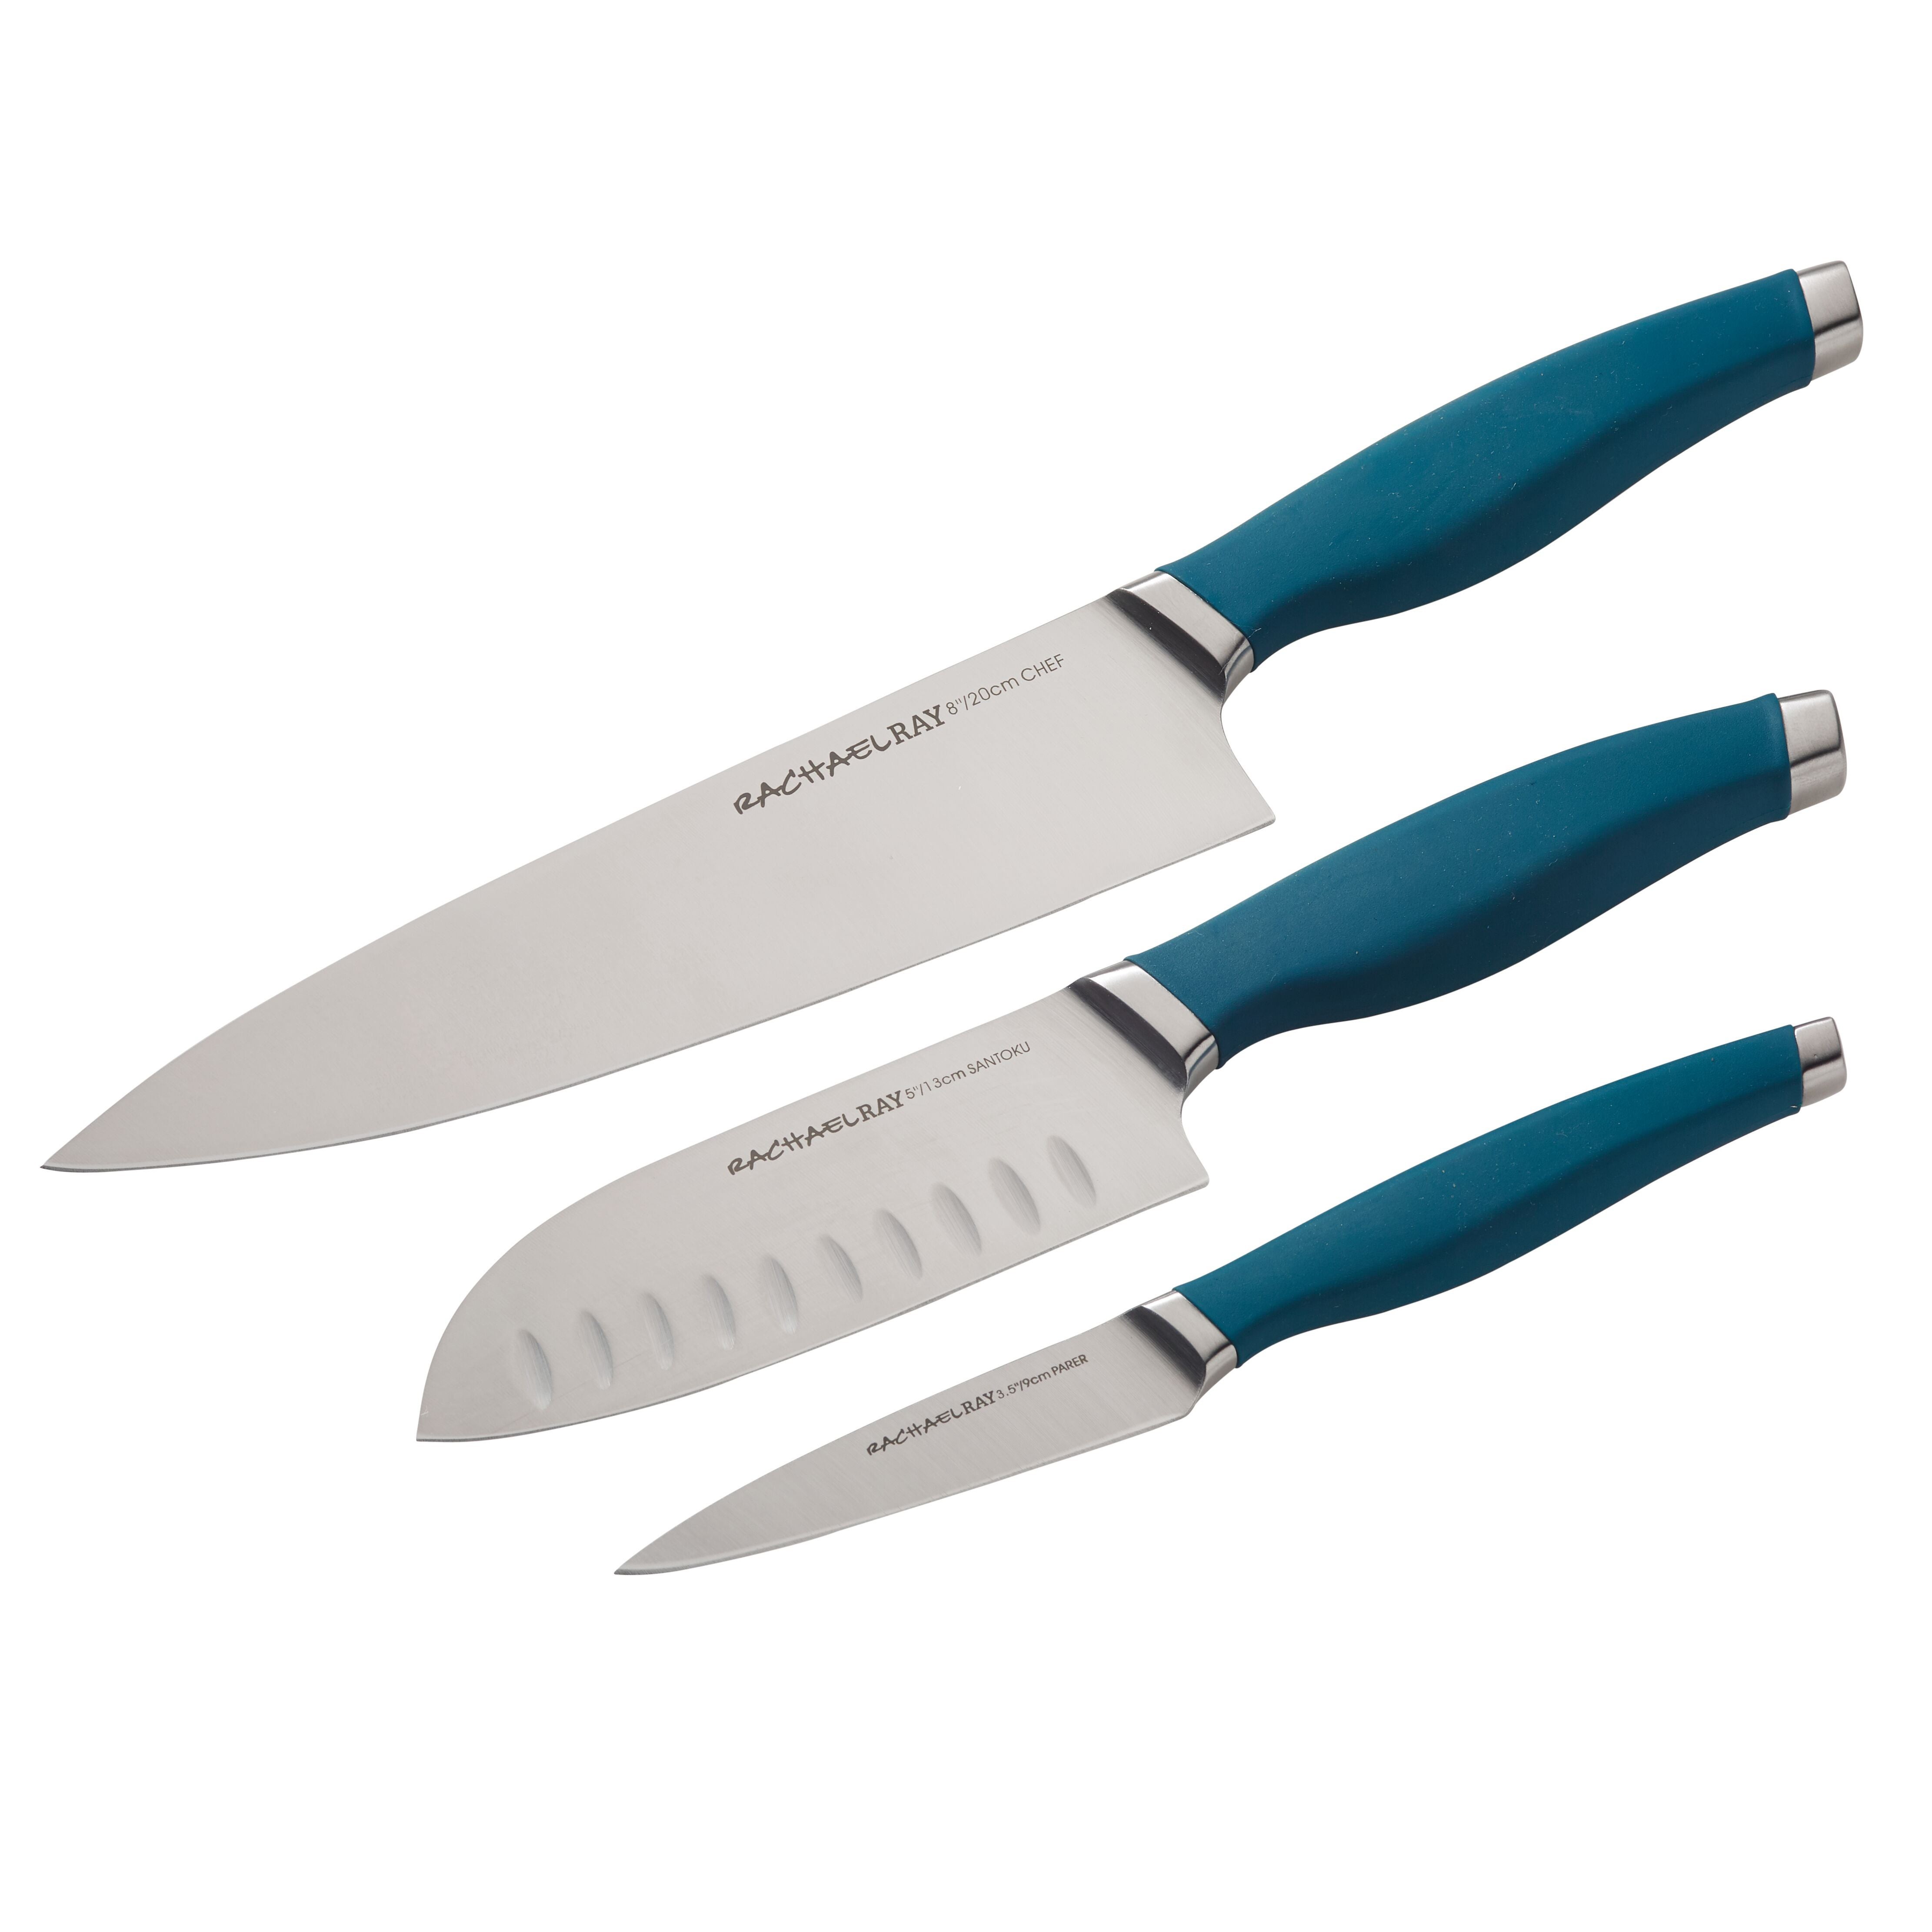 3pc Assorted Cutlery Set Teal